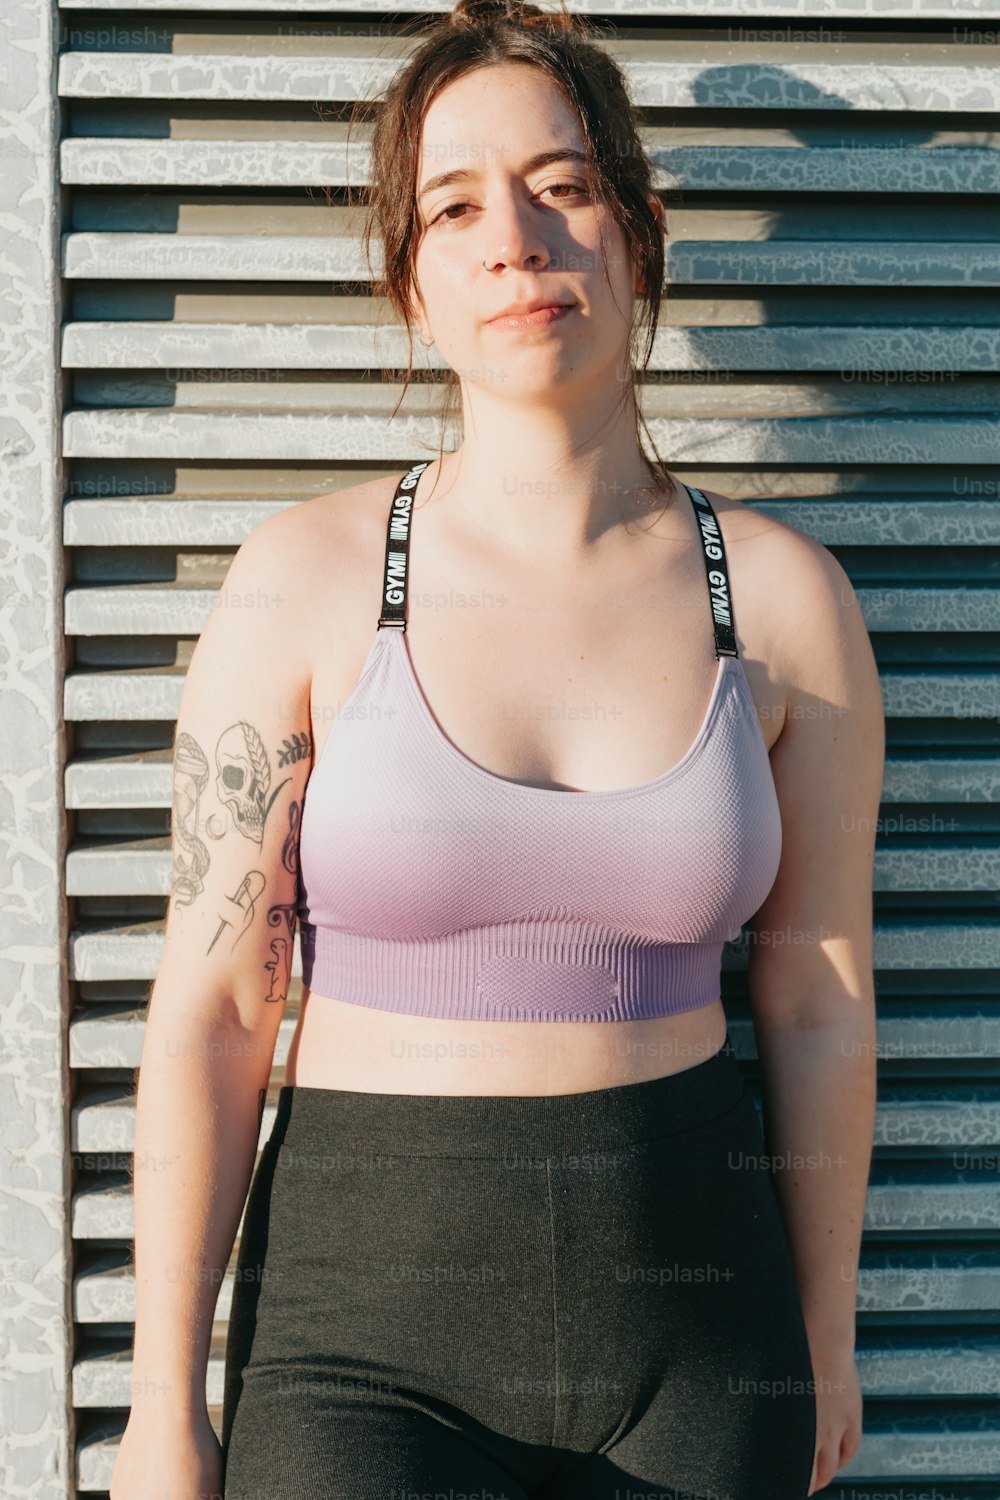 a woman wearing a sports bra top and black pants